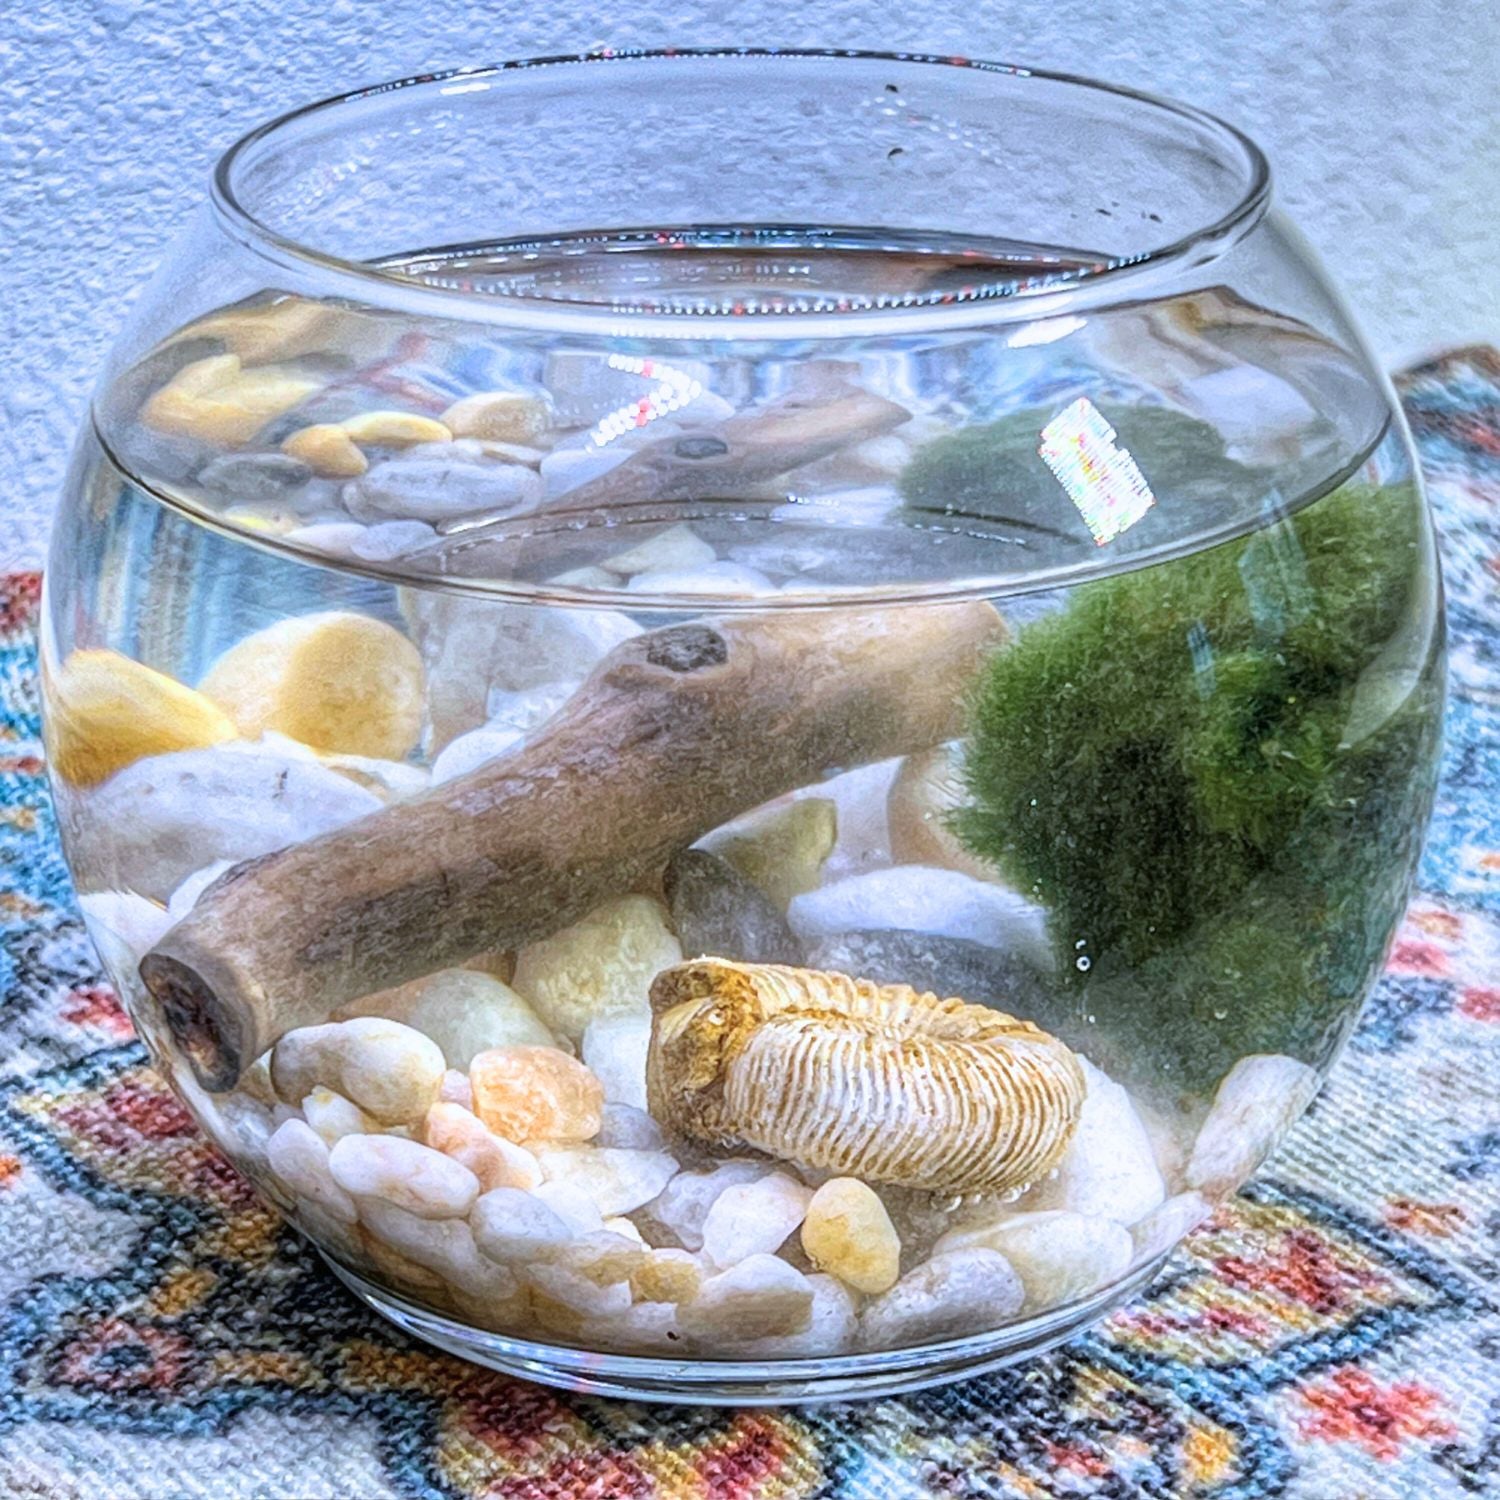 A side view of a spherical glass aquarium with a wide opening, filled with a Marimo Moss Ball, spiral fossils, driftwood, and smooth river stones on a colorful woven fabric.